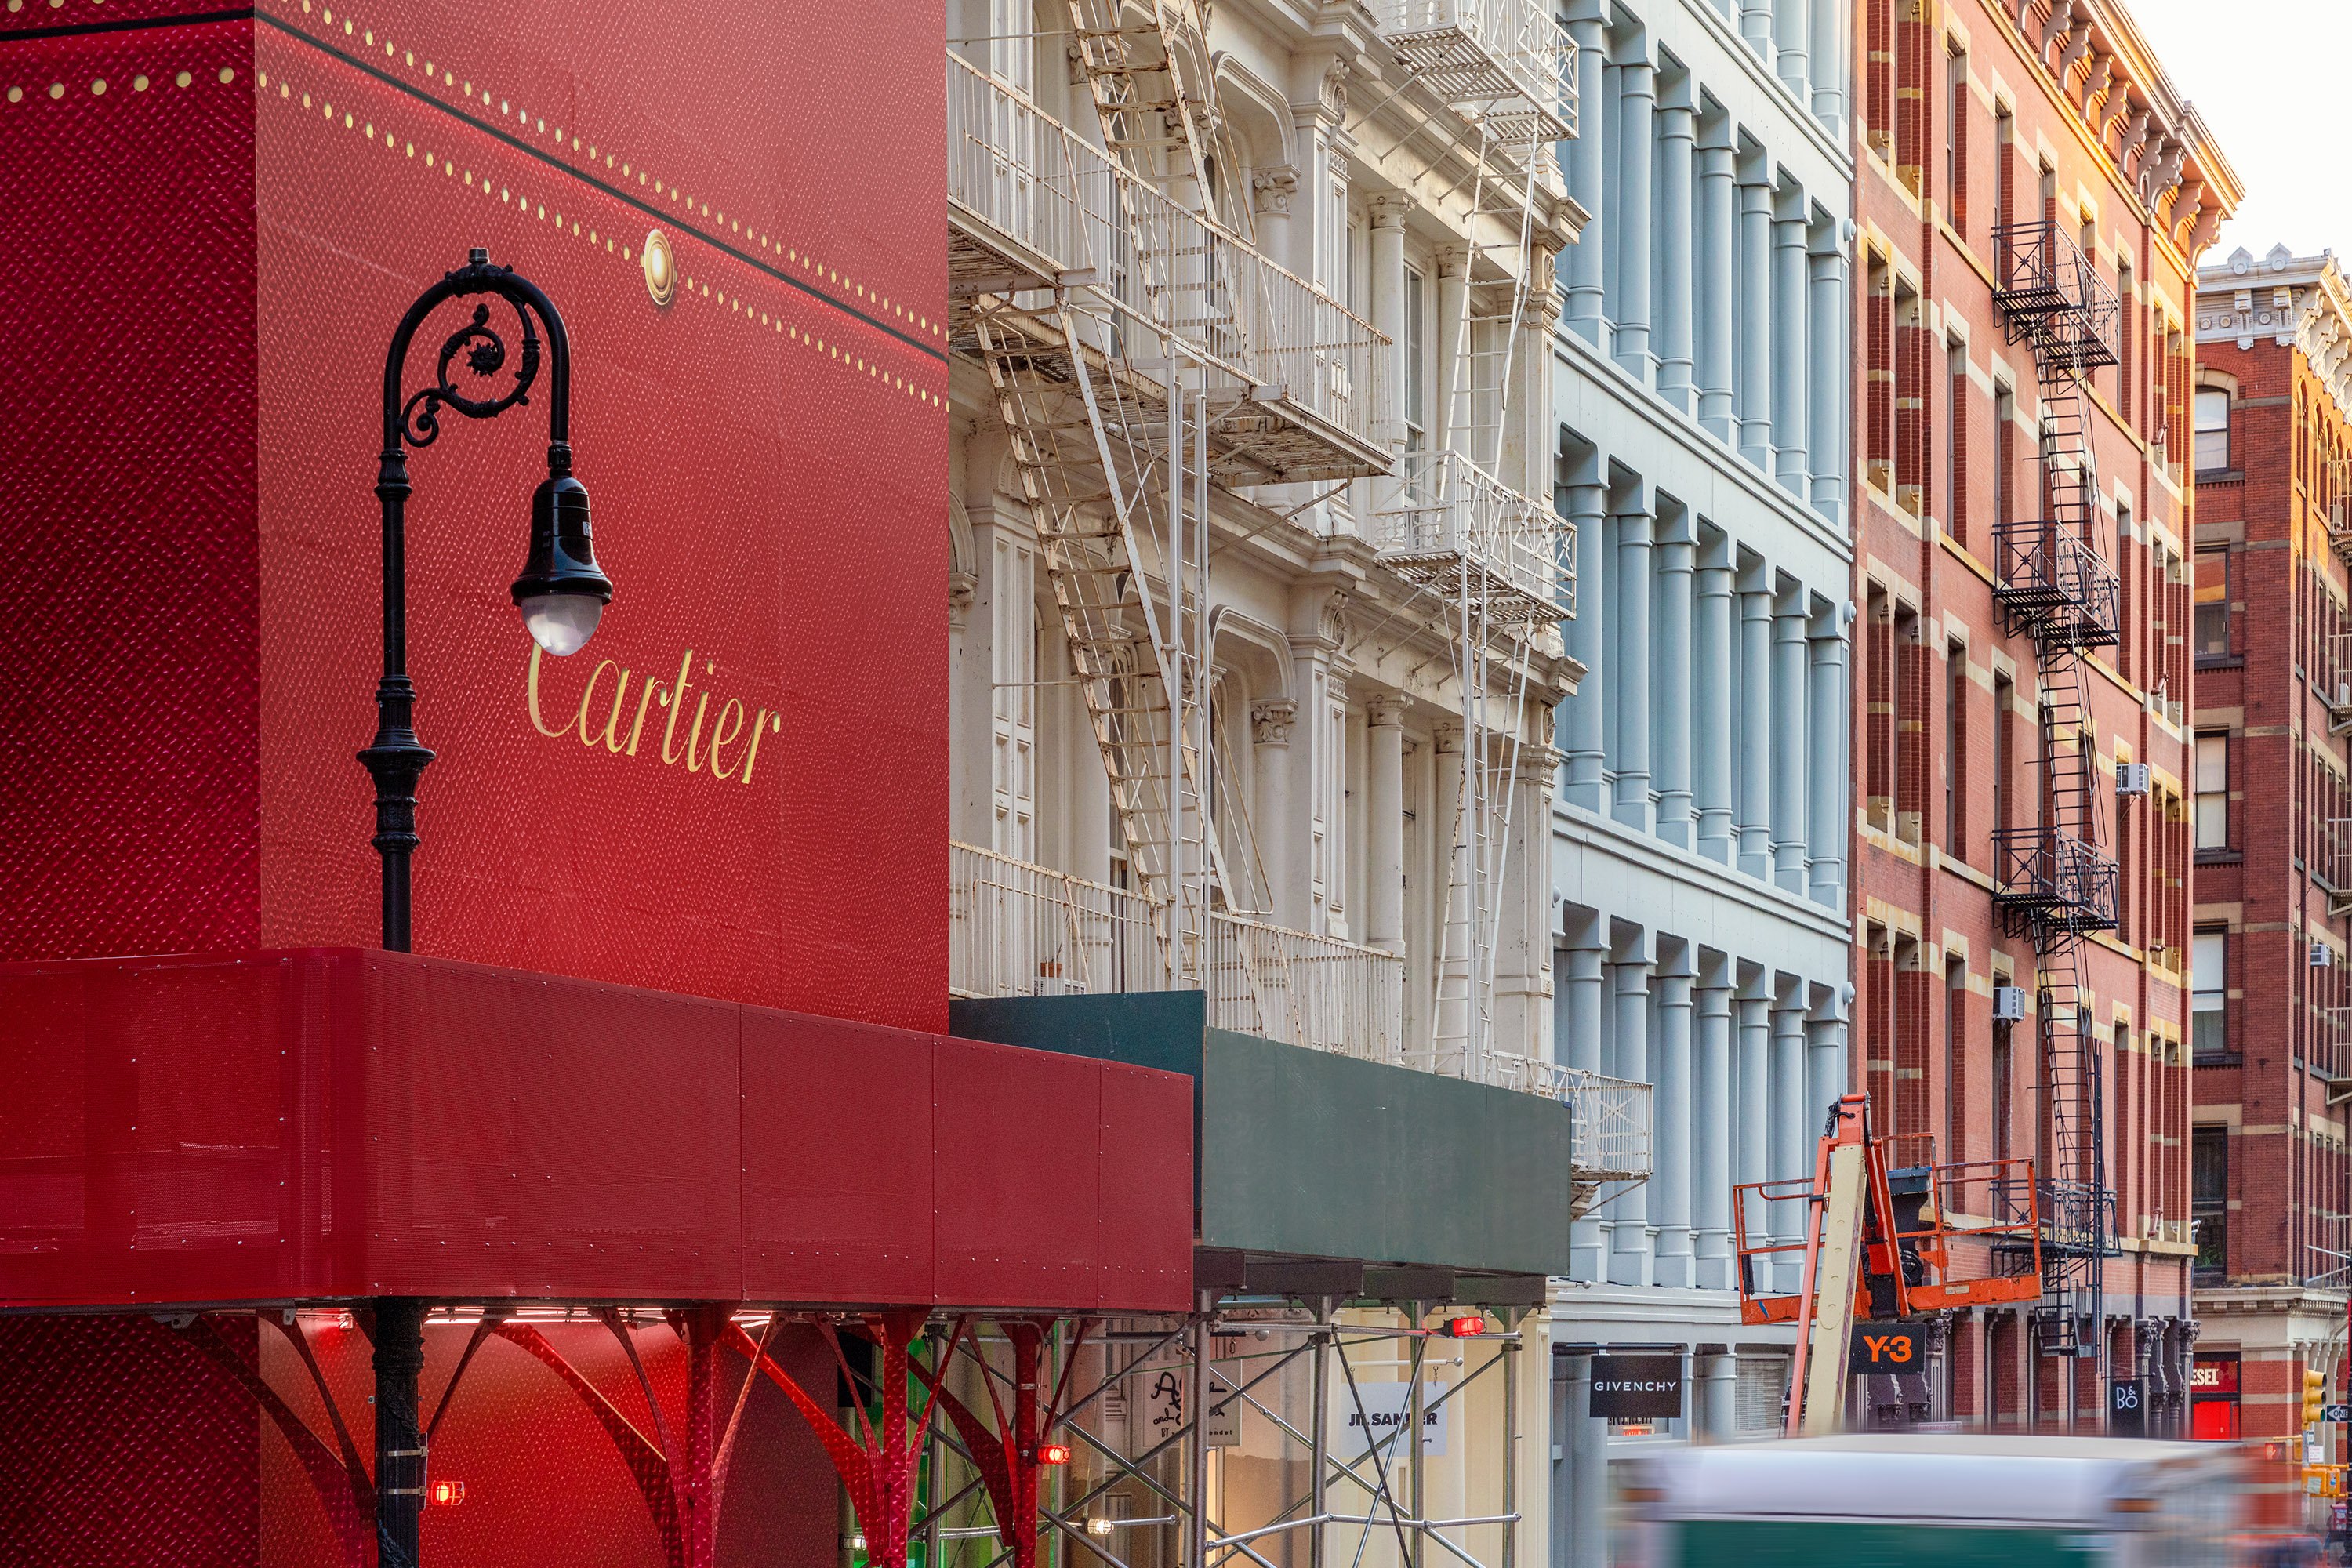 ⚜️ This is the Cartier Store on 5th Avenue. #newyorknewyork